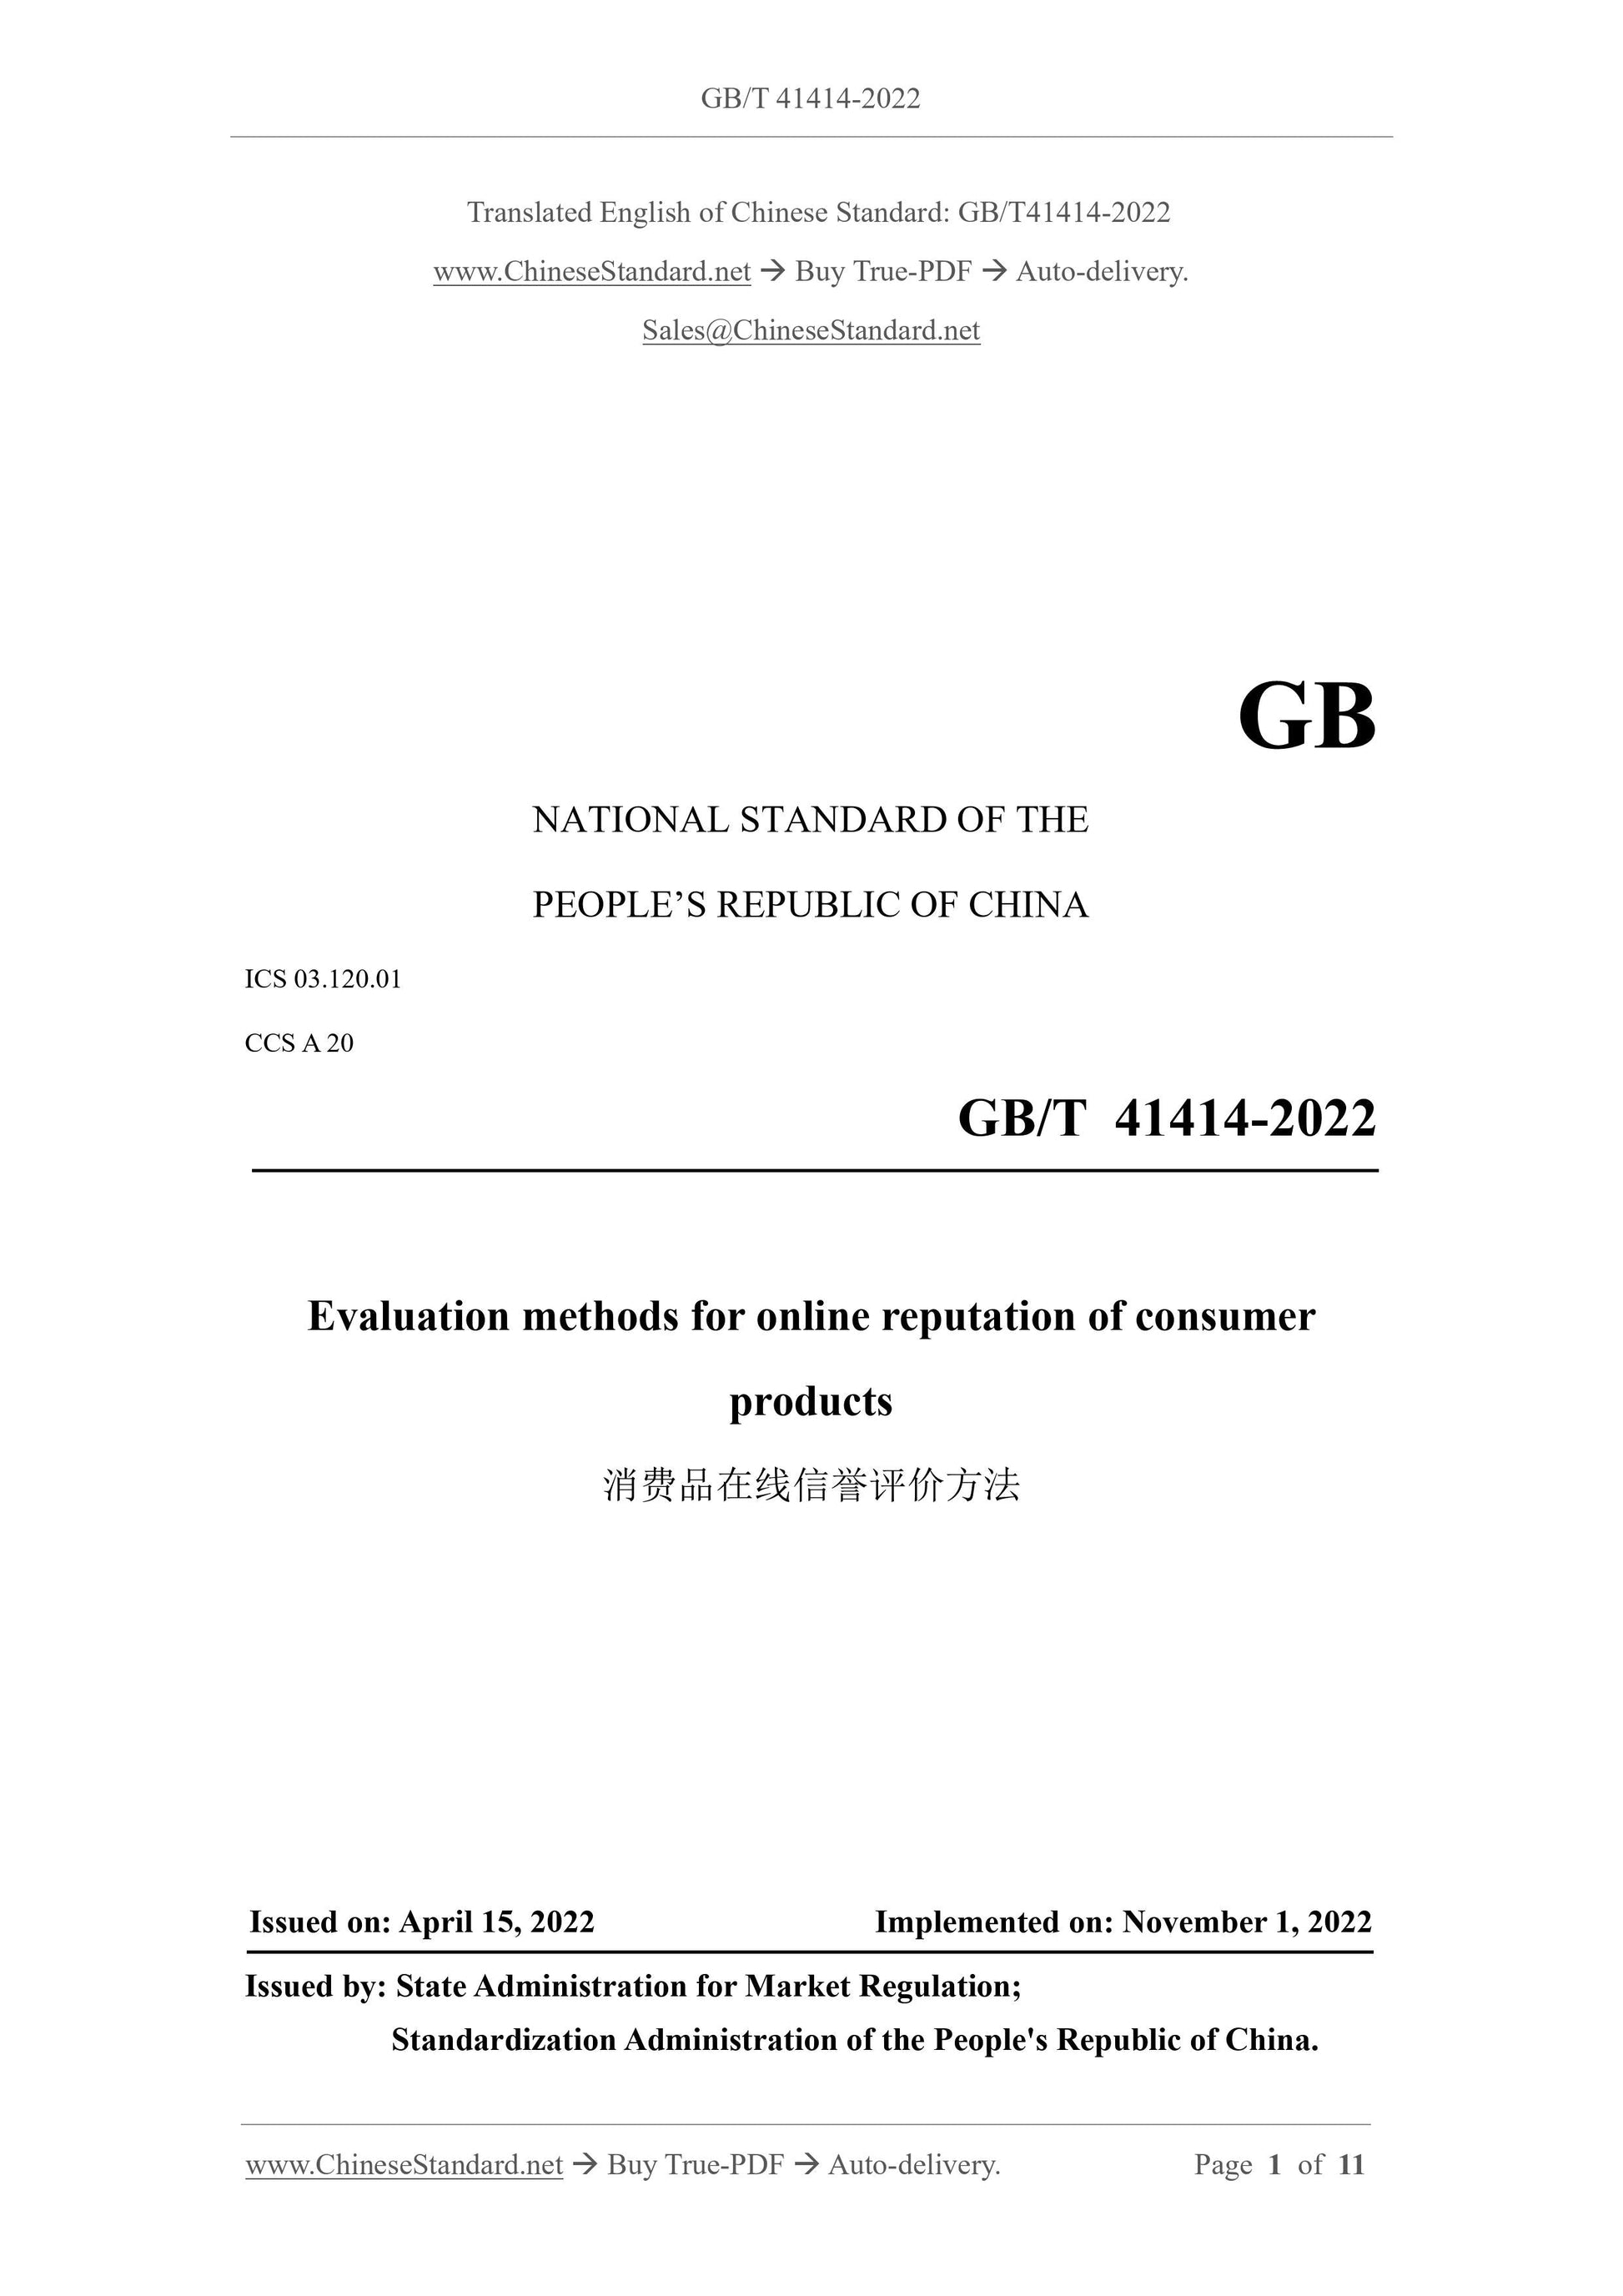 GB/T 41414-2022 Page 1